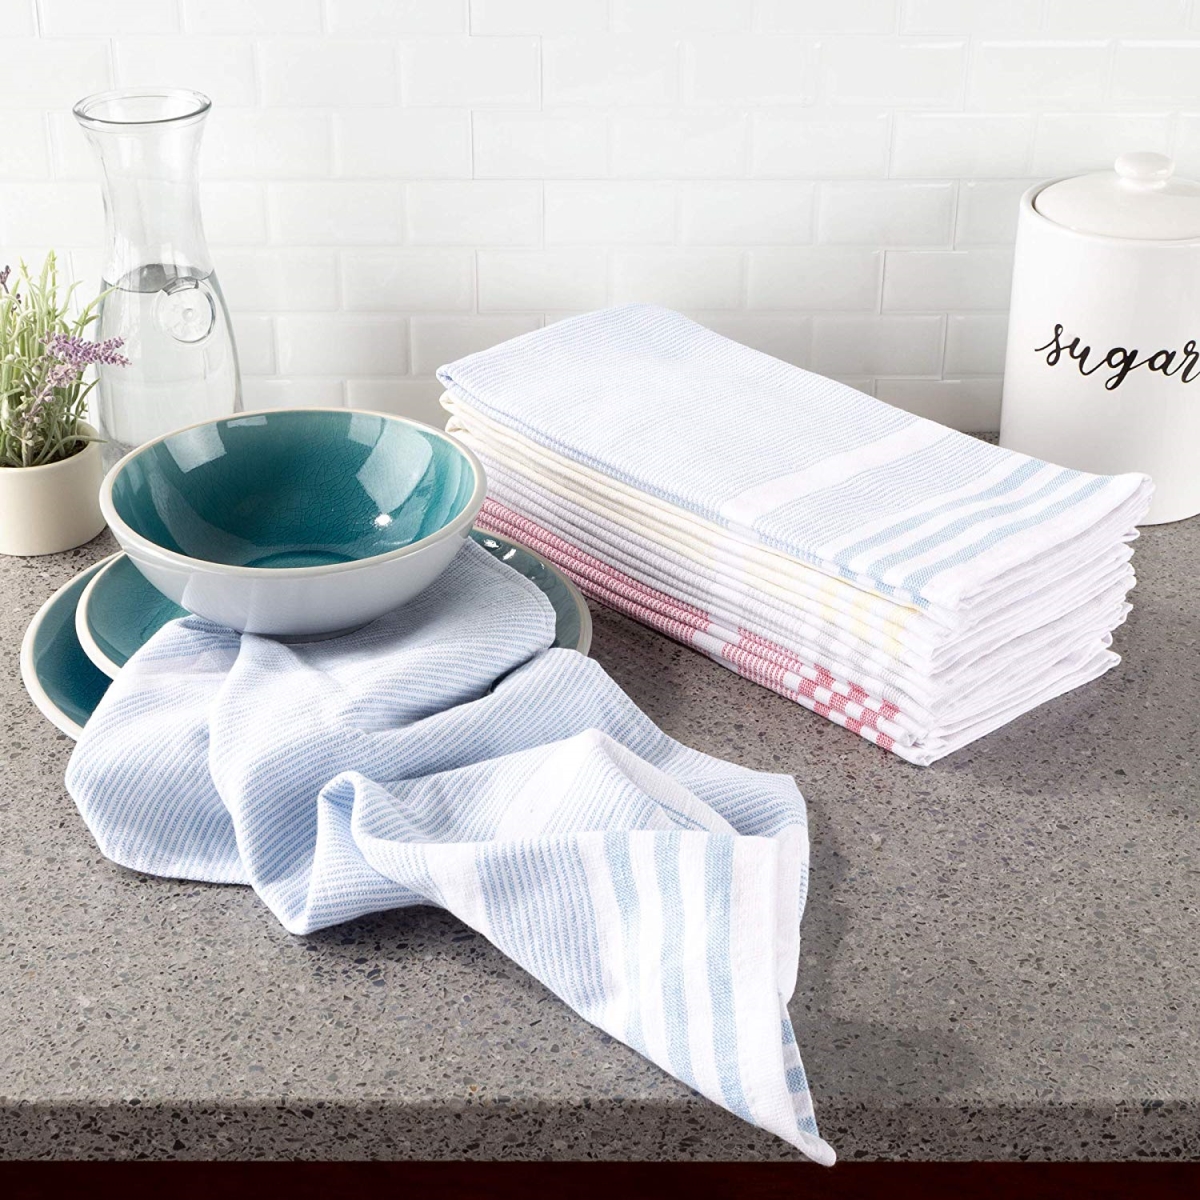 69a-39338 16 X 28 In. Home Kitchen Towels, Multi-color - Set Of 8